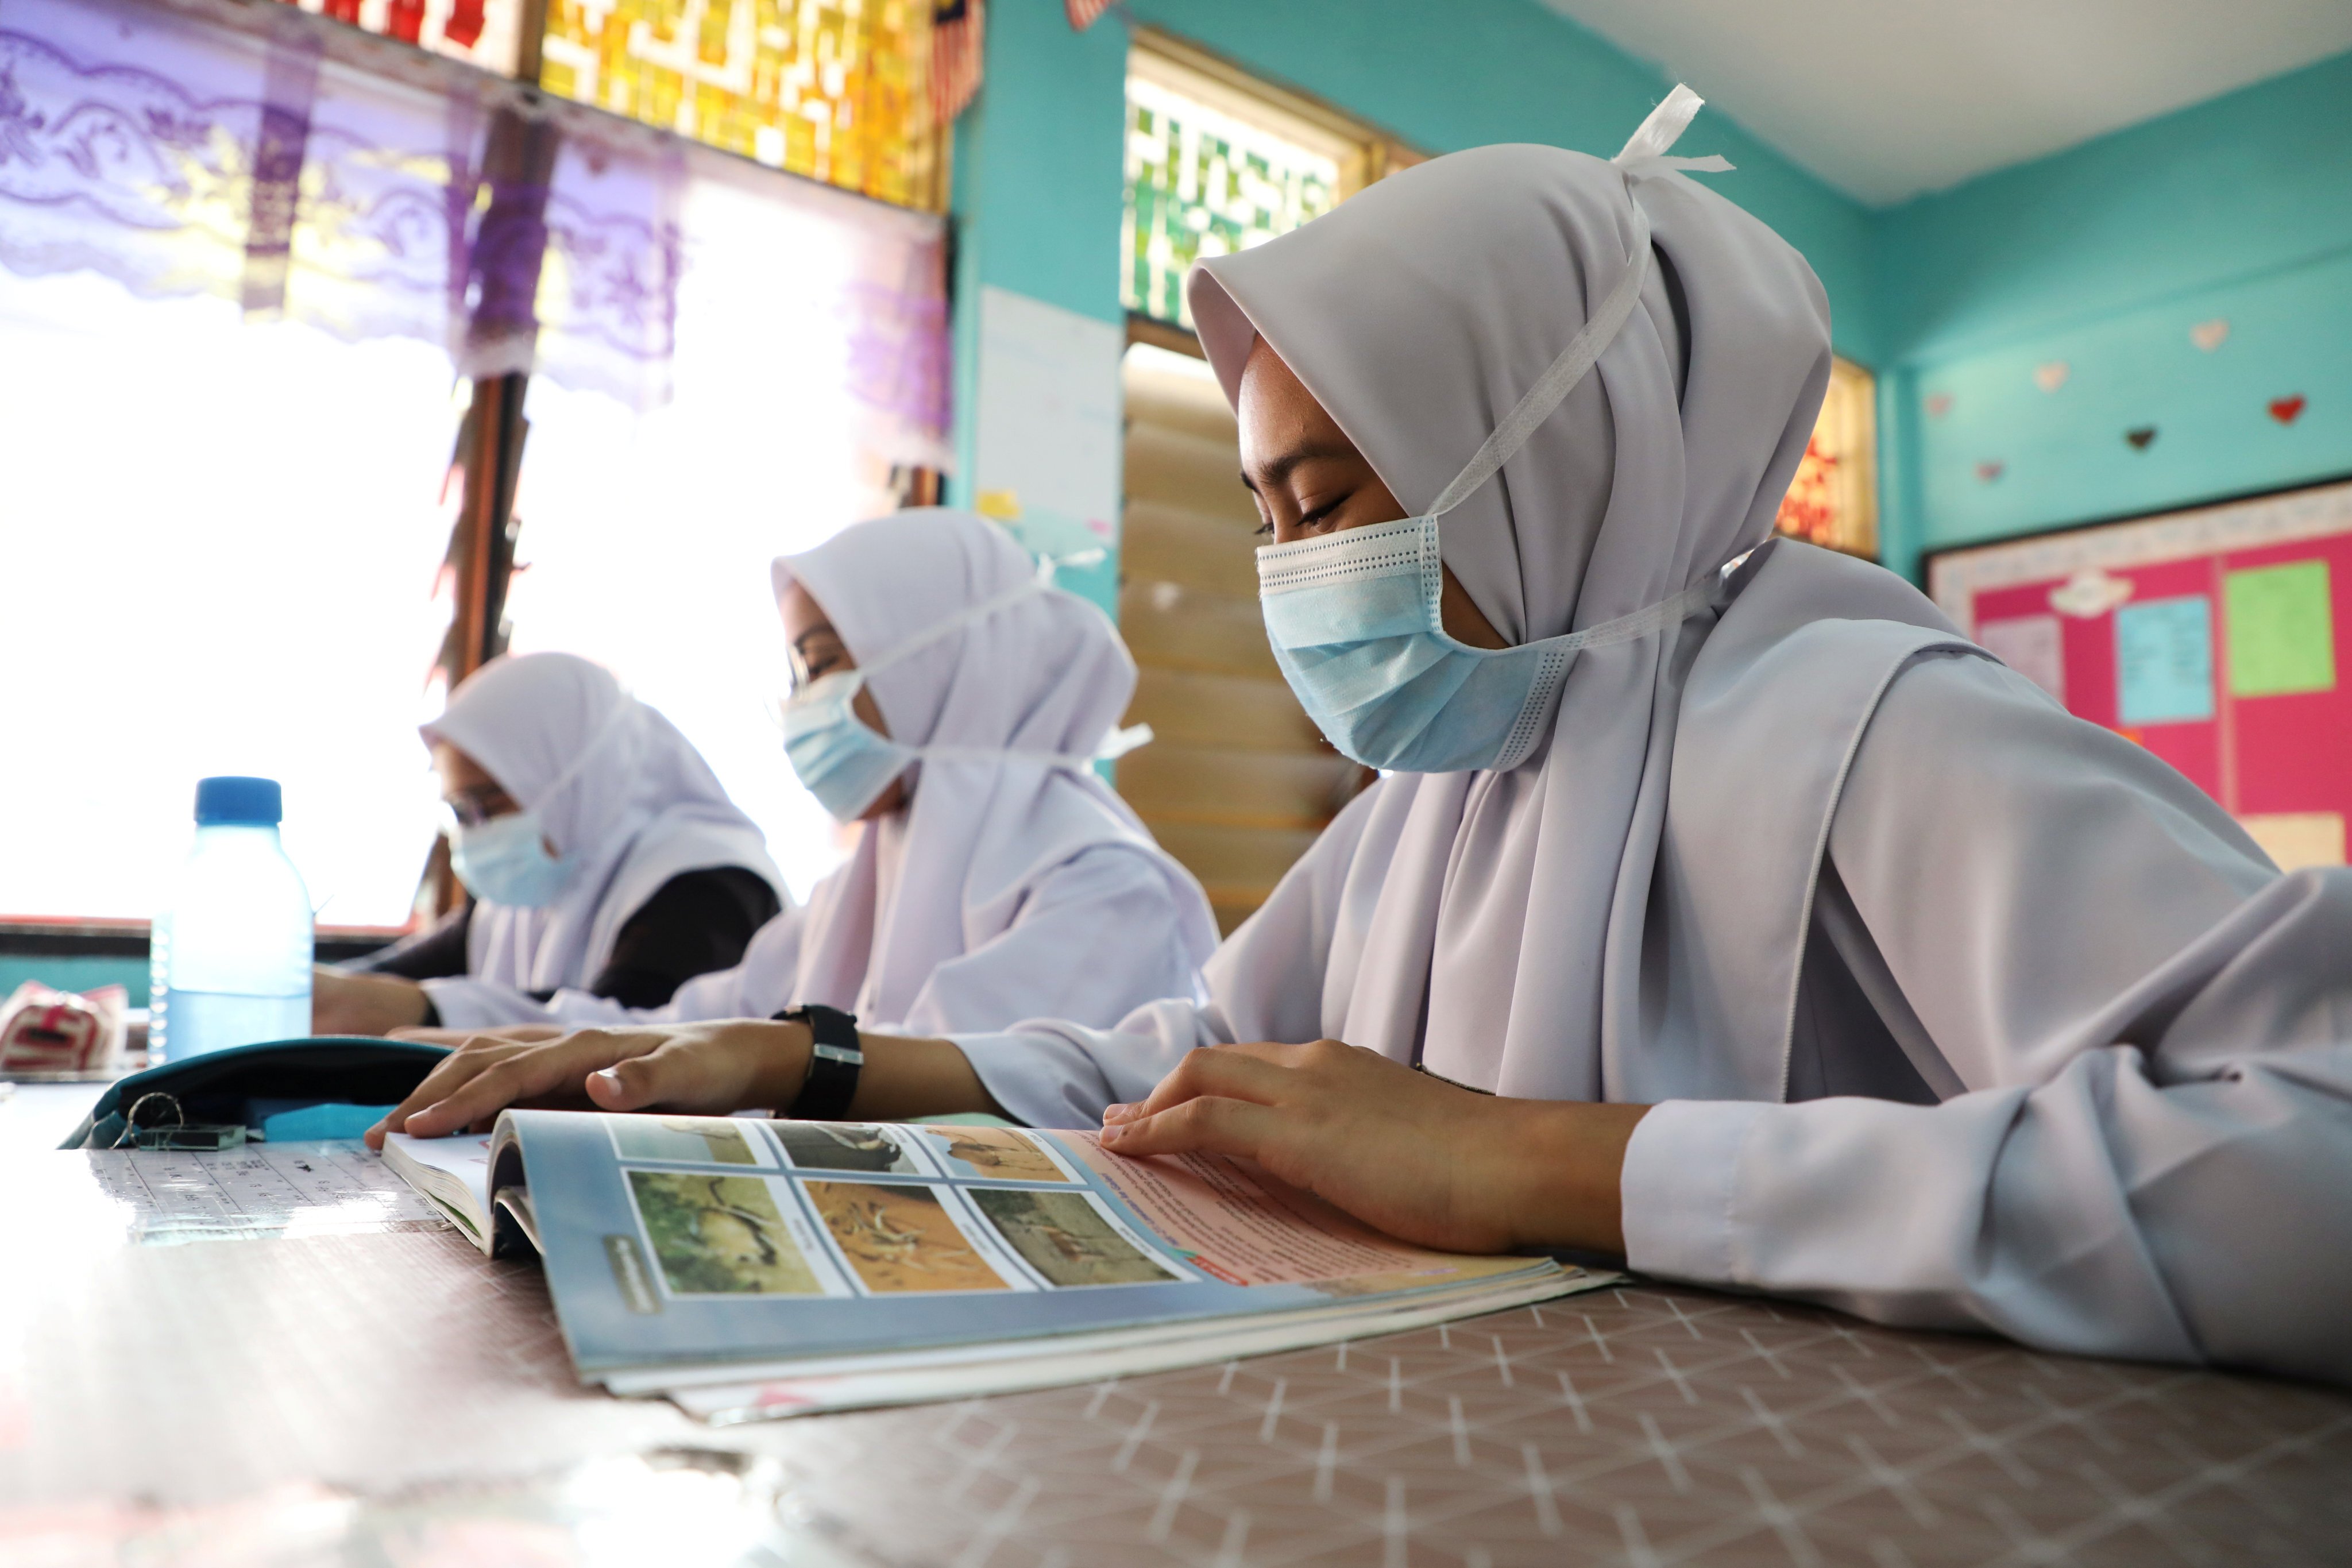 Students at a school in Puchong, Malaysia. Photo: Reuters